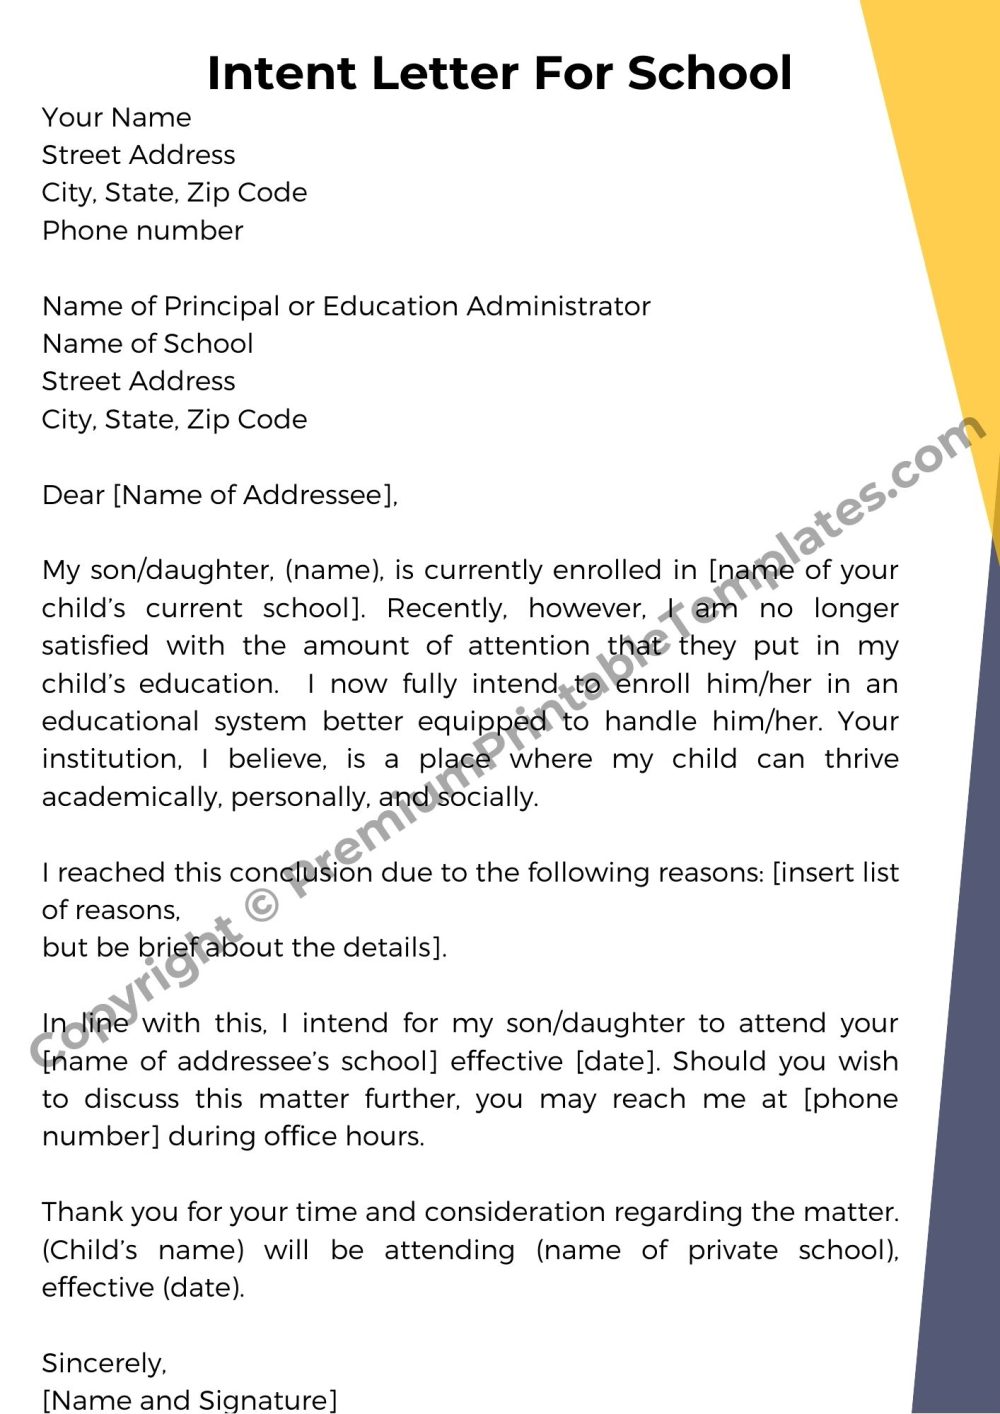 Intent Letter For School